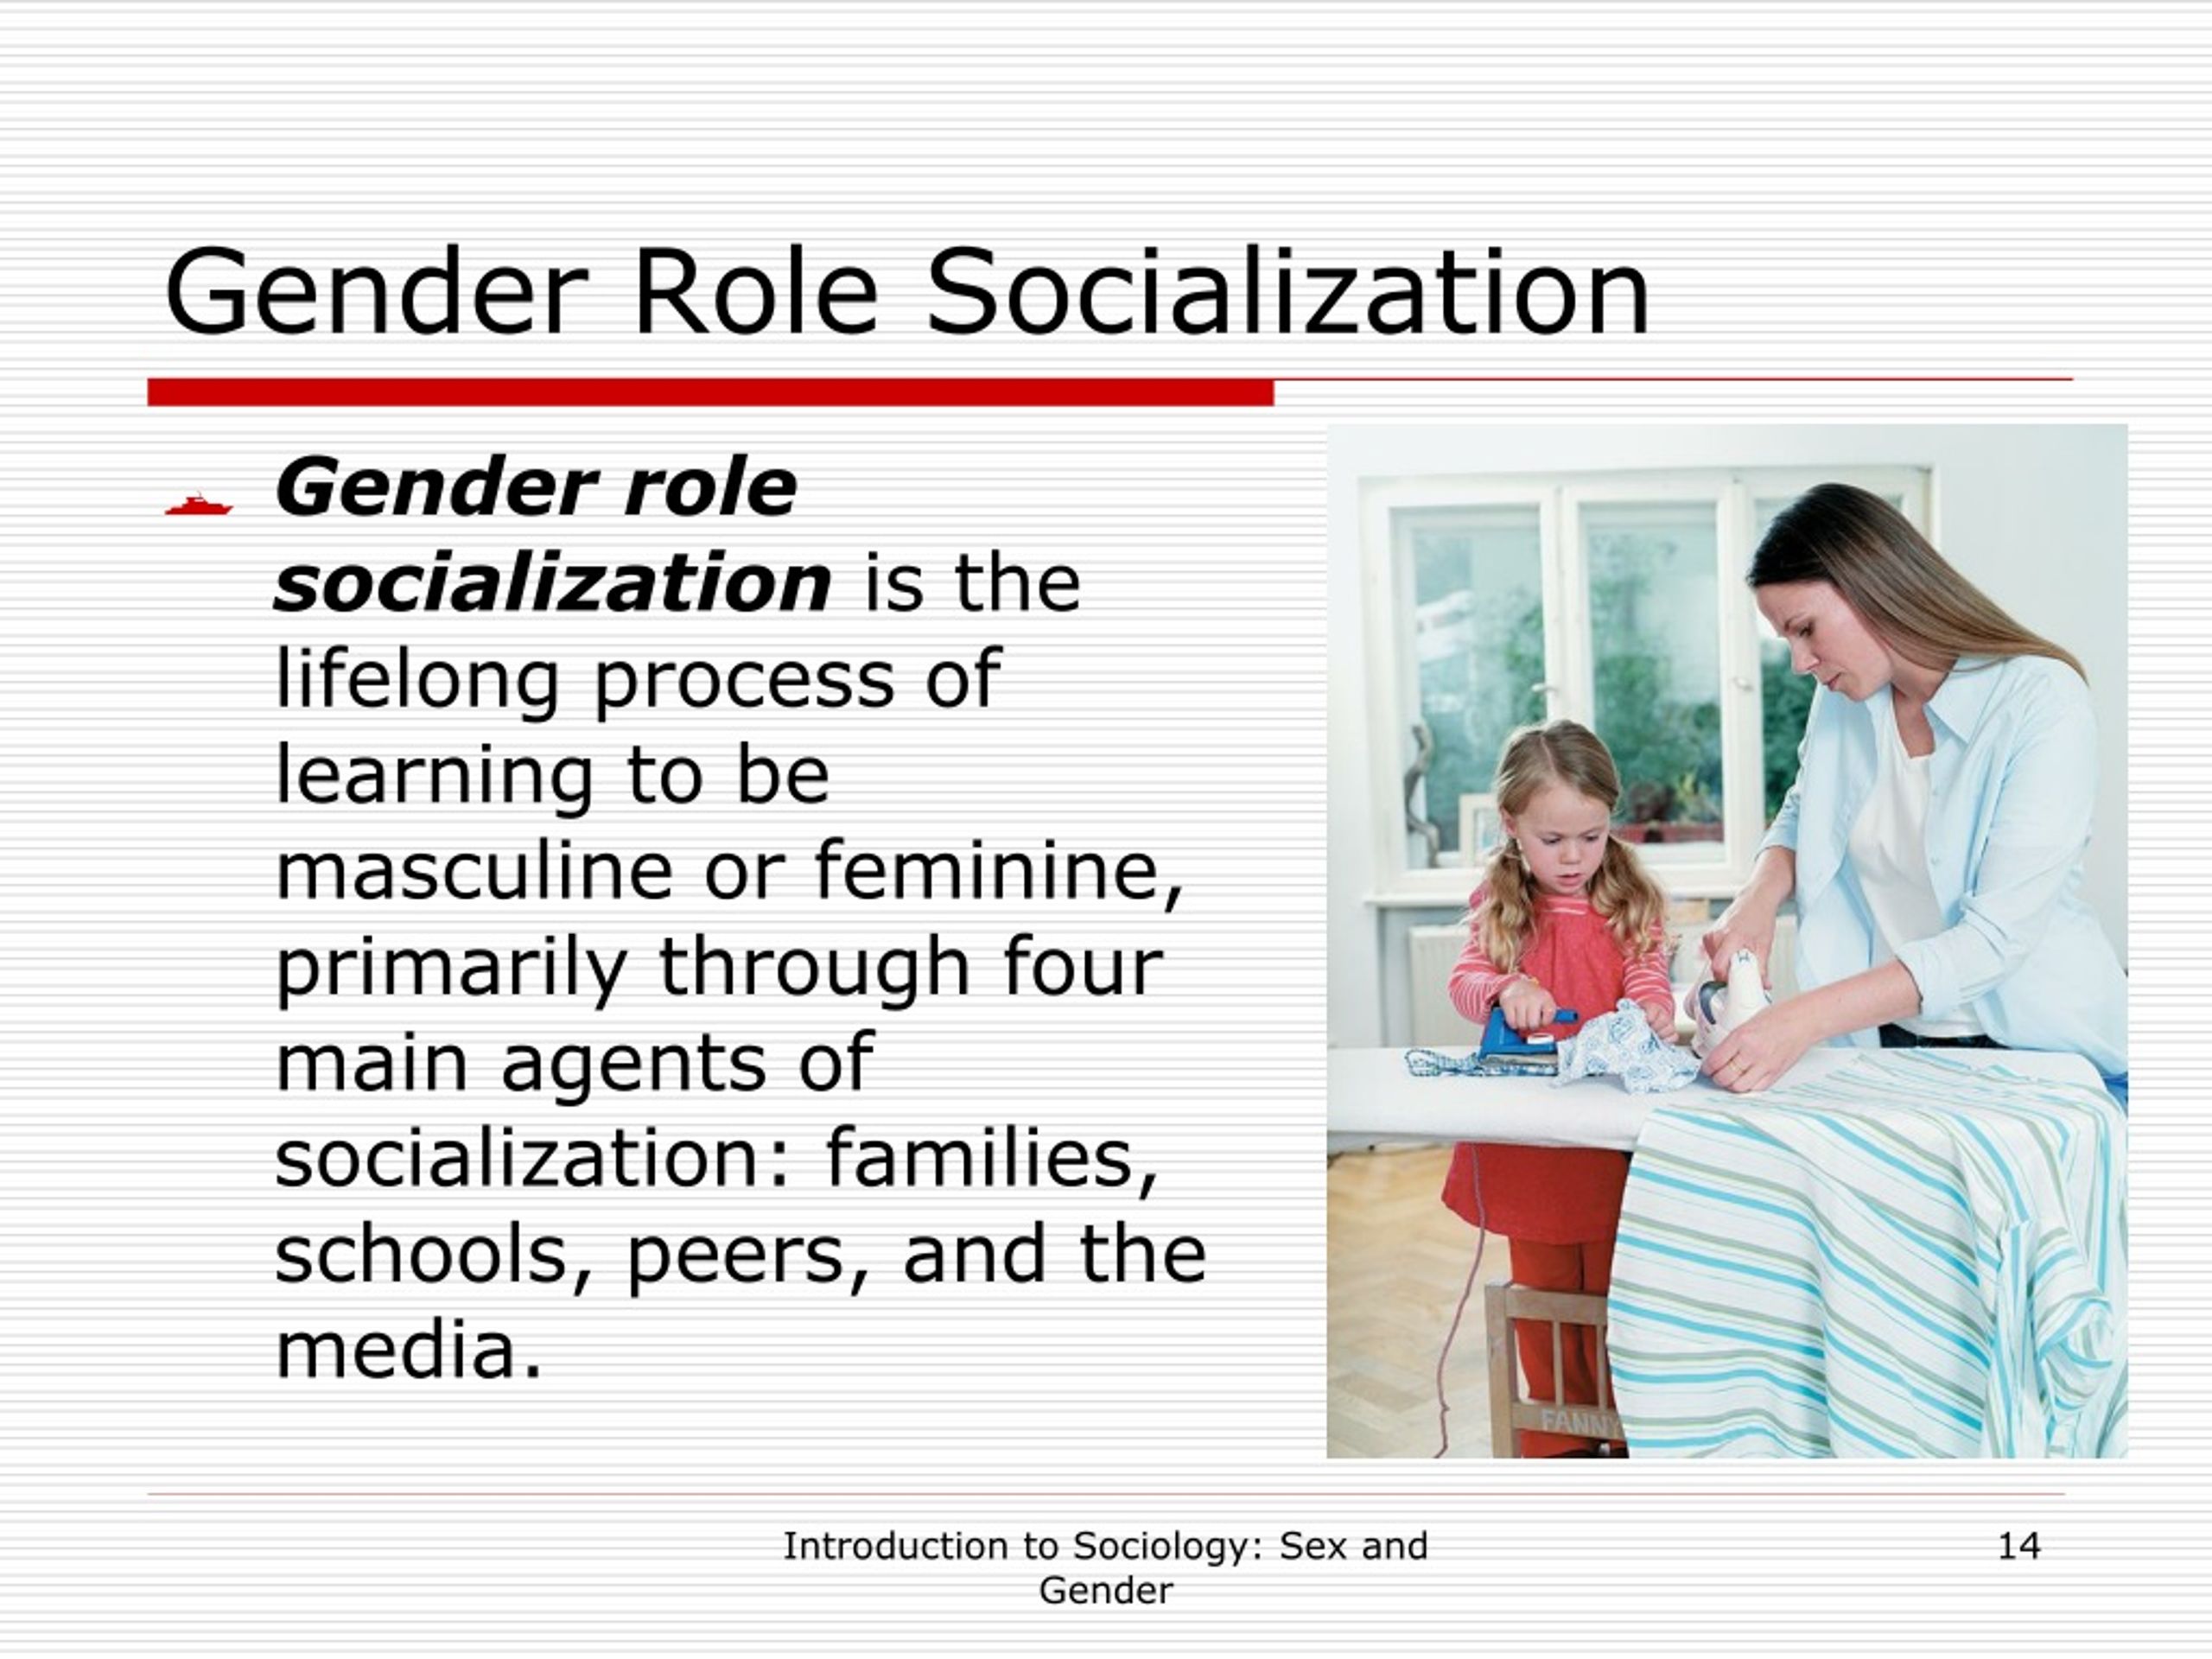 research on gender role socialization during childhood has found that